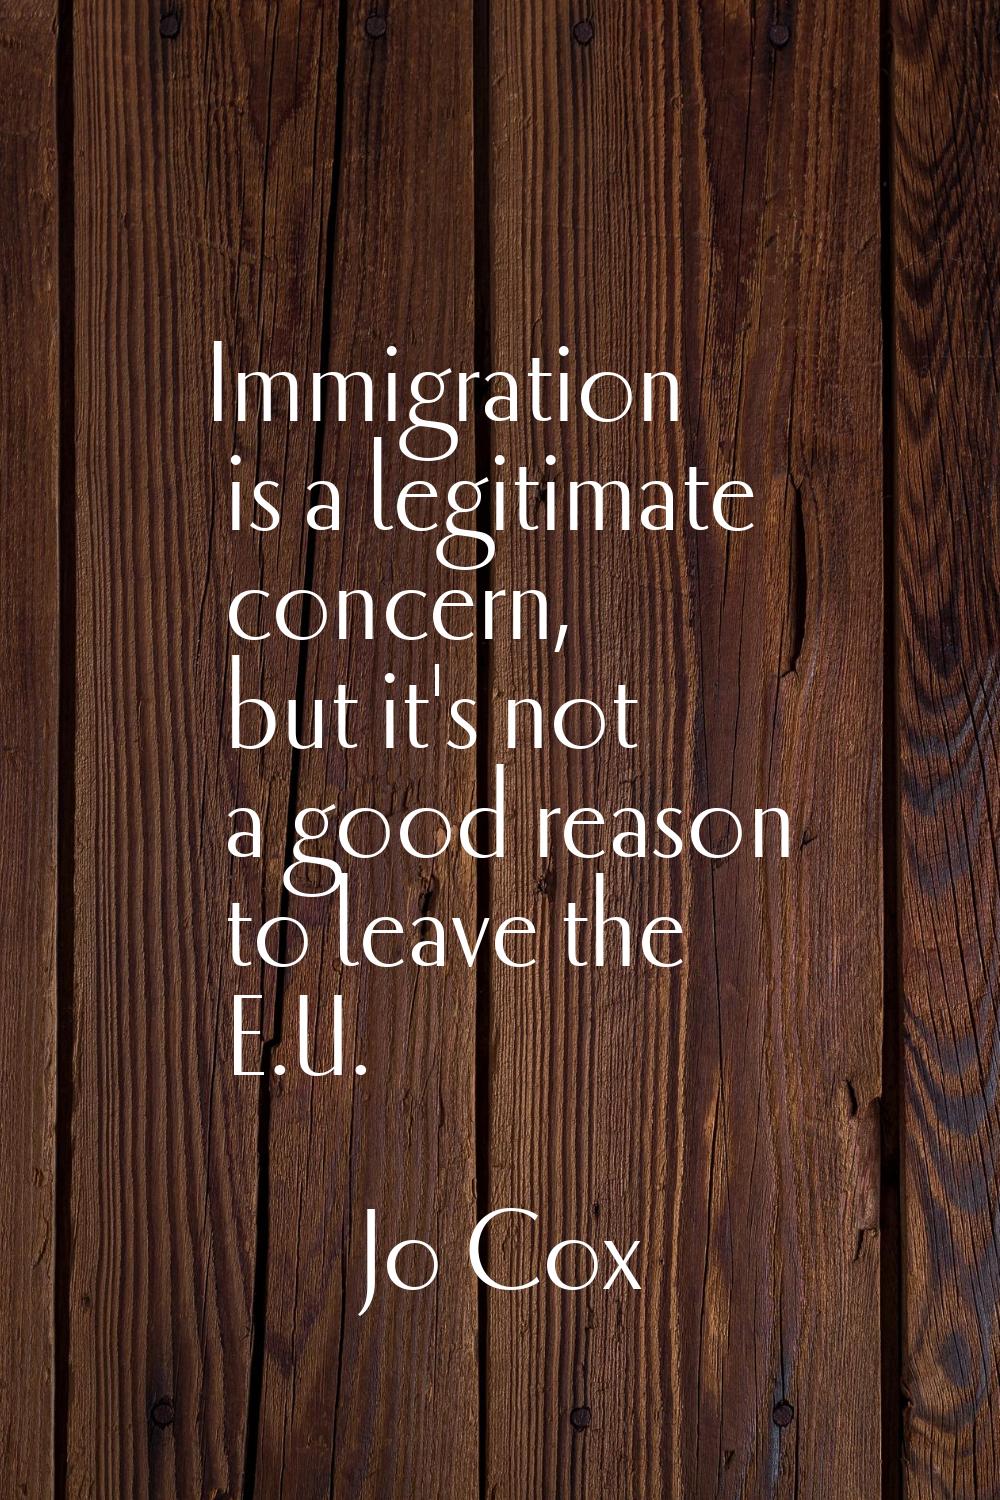 Immigration is a legitimate concern, but it's not a good reason to leave the E.U.